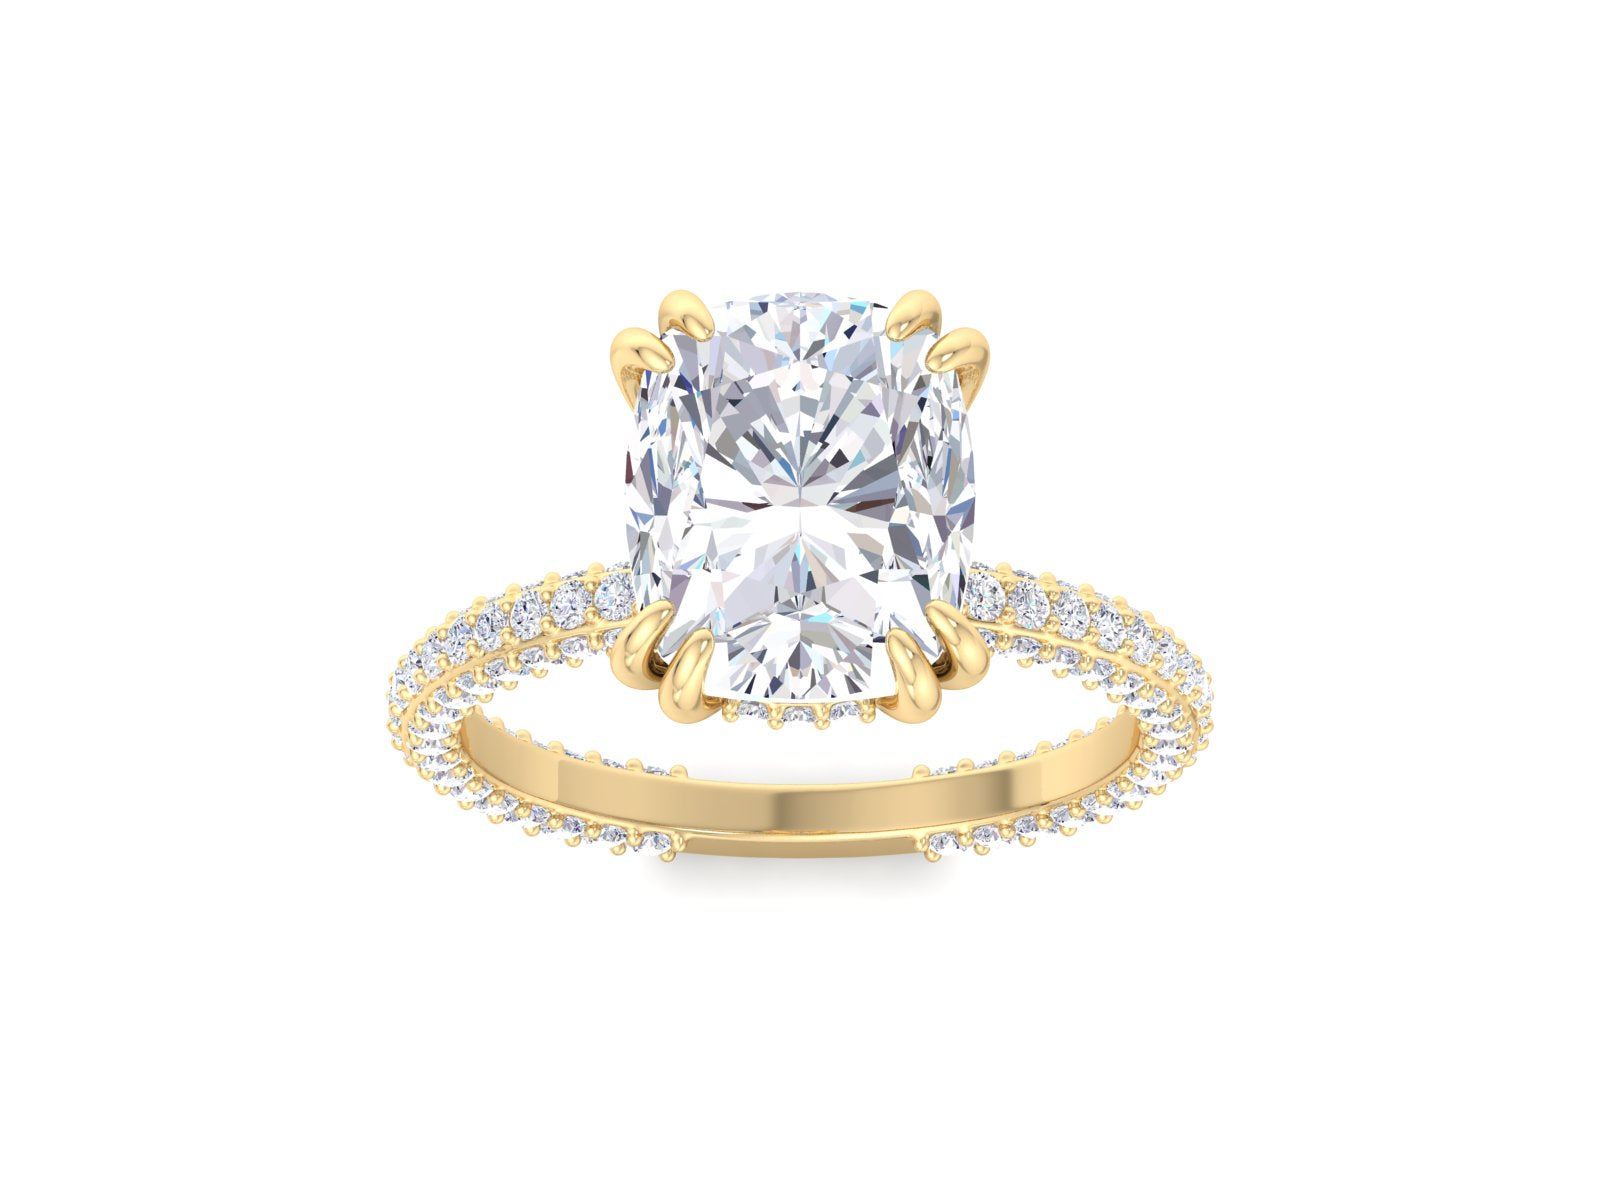 2.0ct Elongated Cushion Cut Diamond Engagement Ring Gift For Her